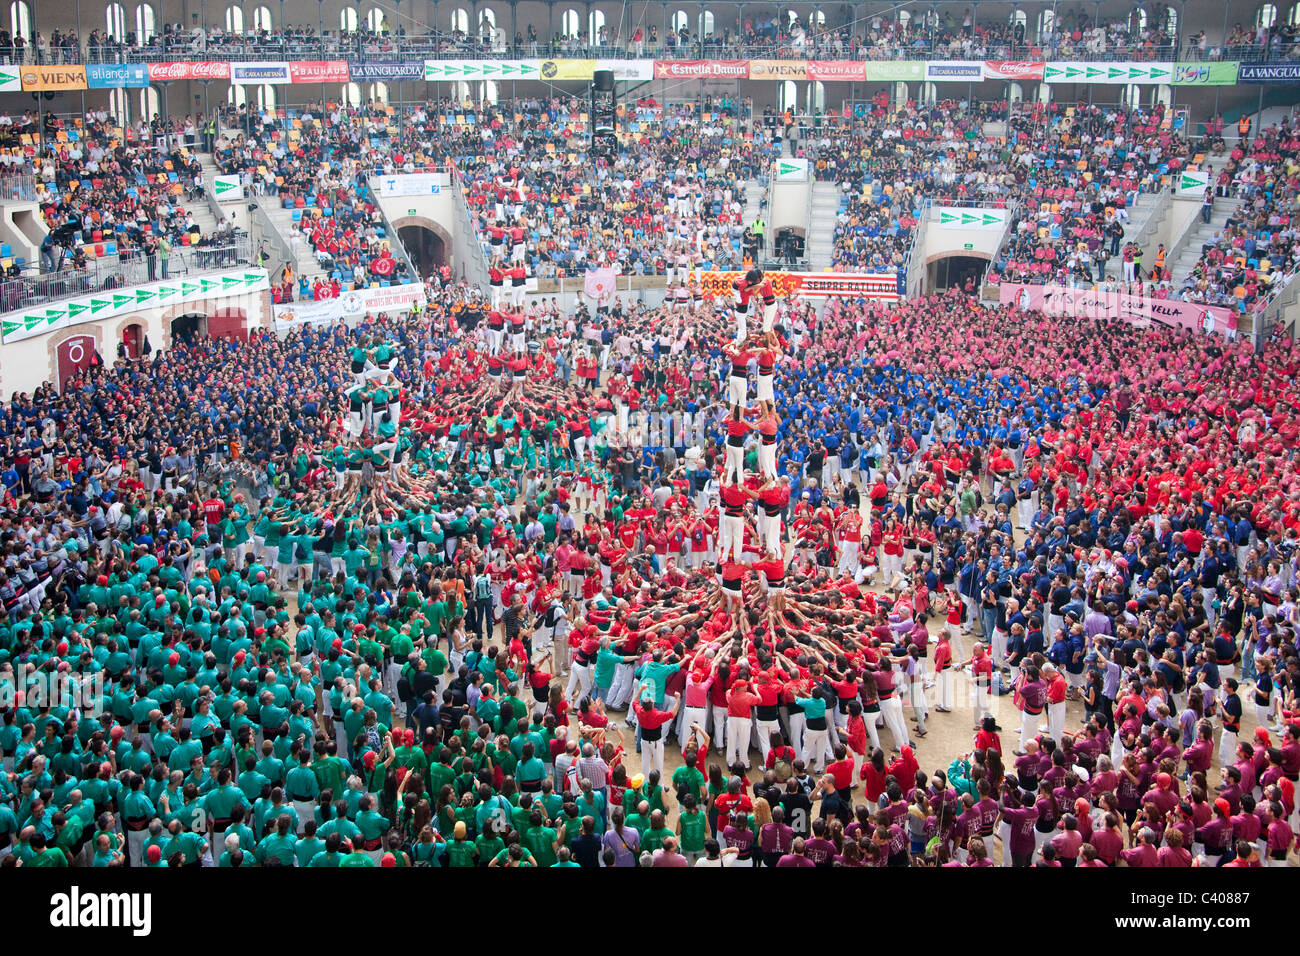 Spanien, Europa, Tarragone, Catalogne, stade, Castellers, festival, pyramide humaine, masses, Castells, tradition Banque D'Images